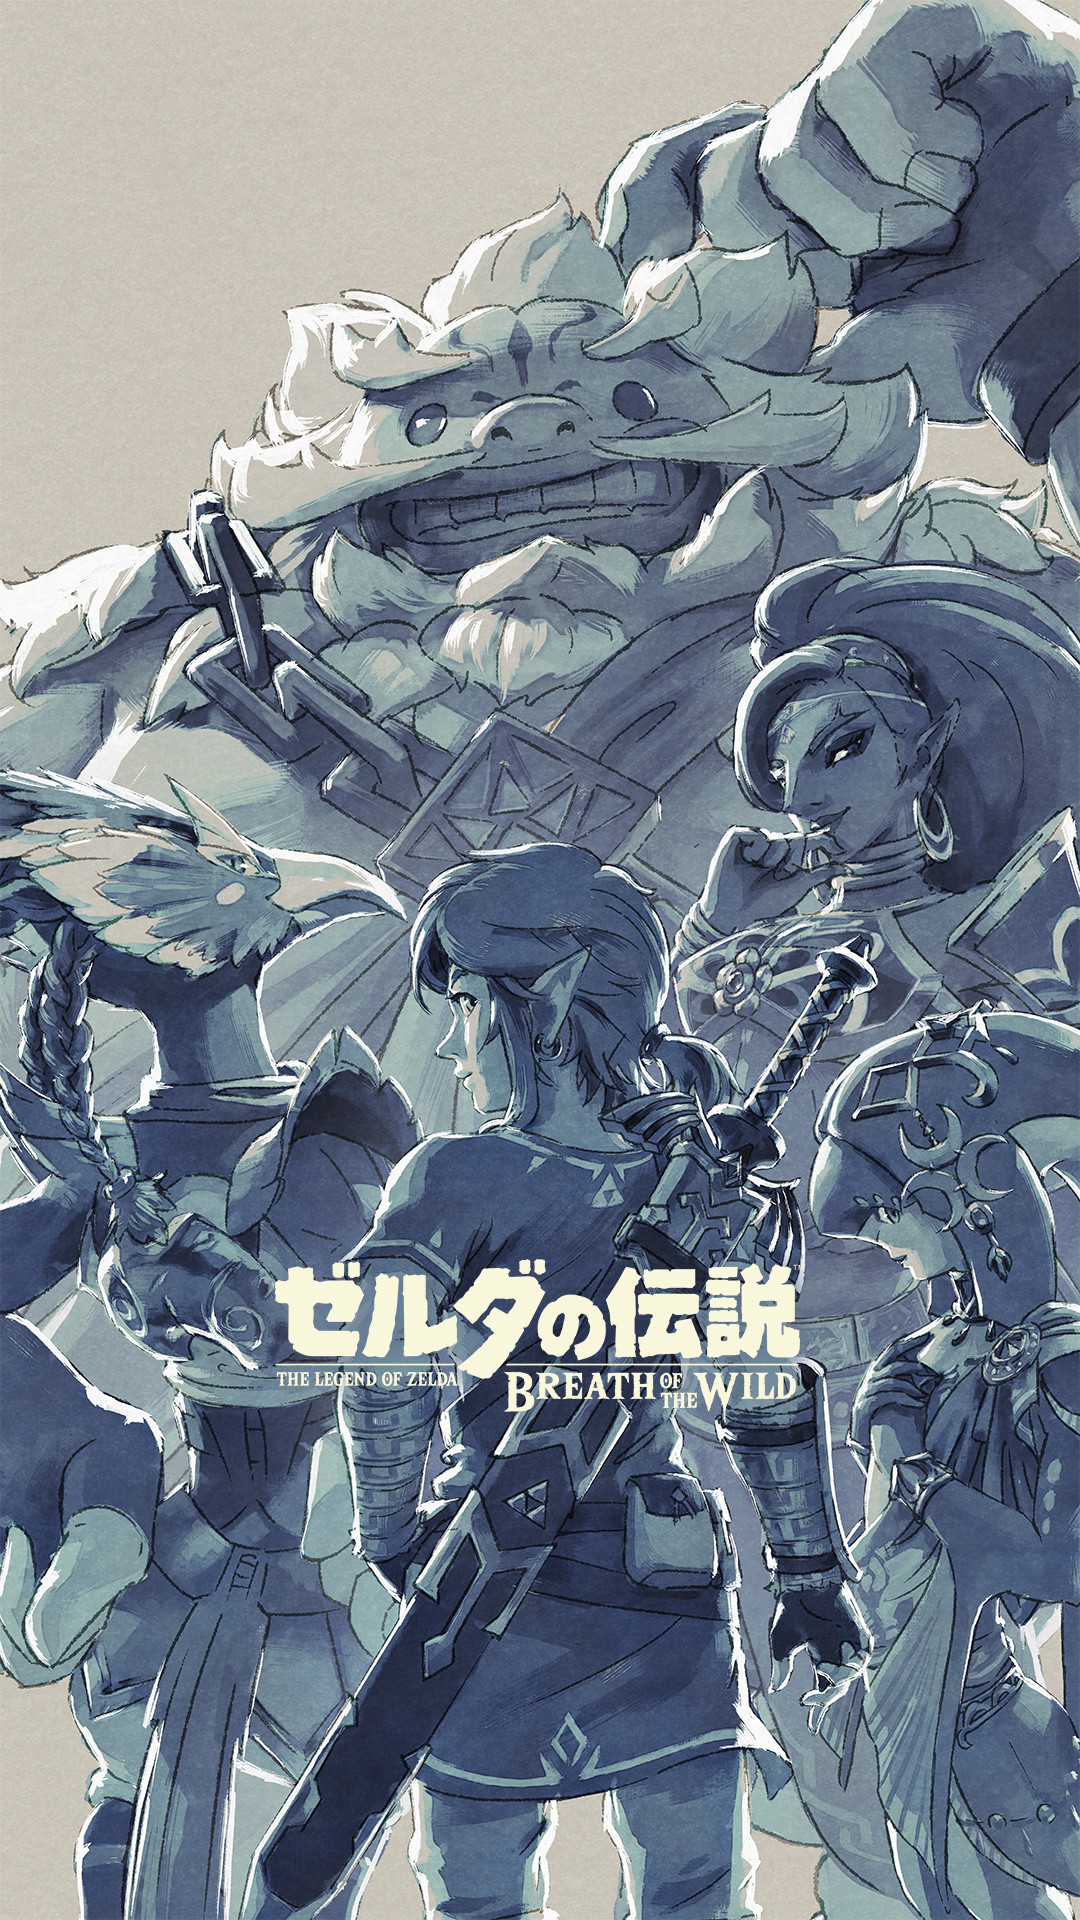 1080x1920 You can download both mobile and desktop wallpapers in the resolution of  your choice on the official Japanese Breath of the Wild page here.